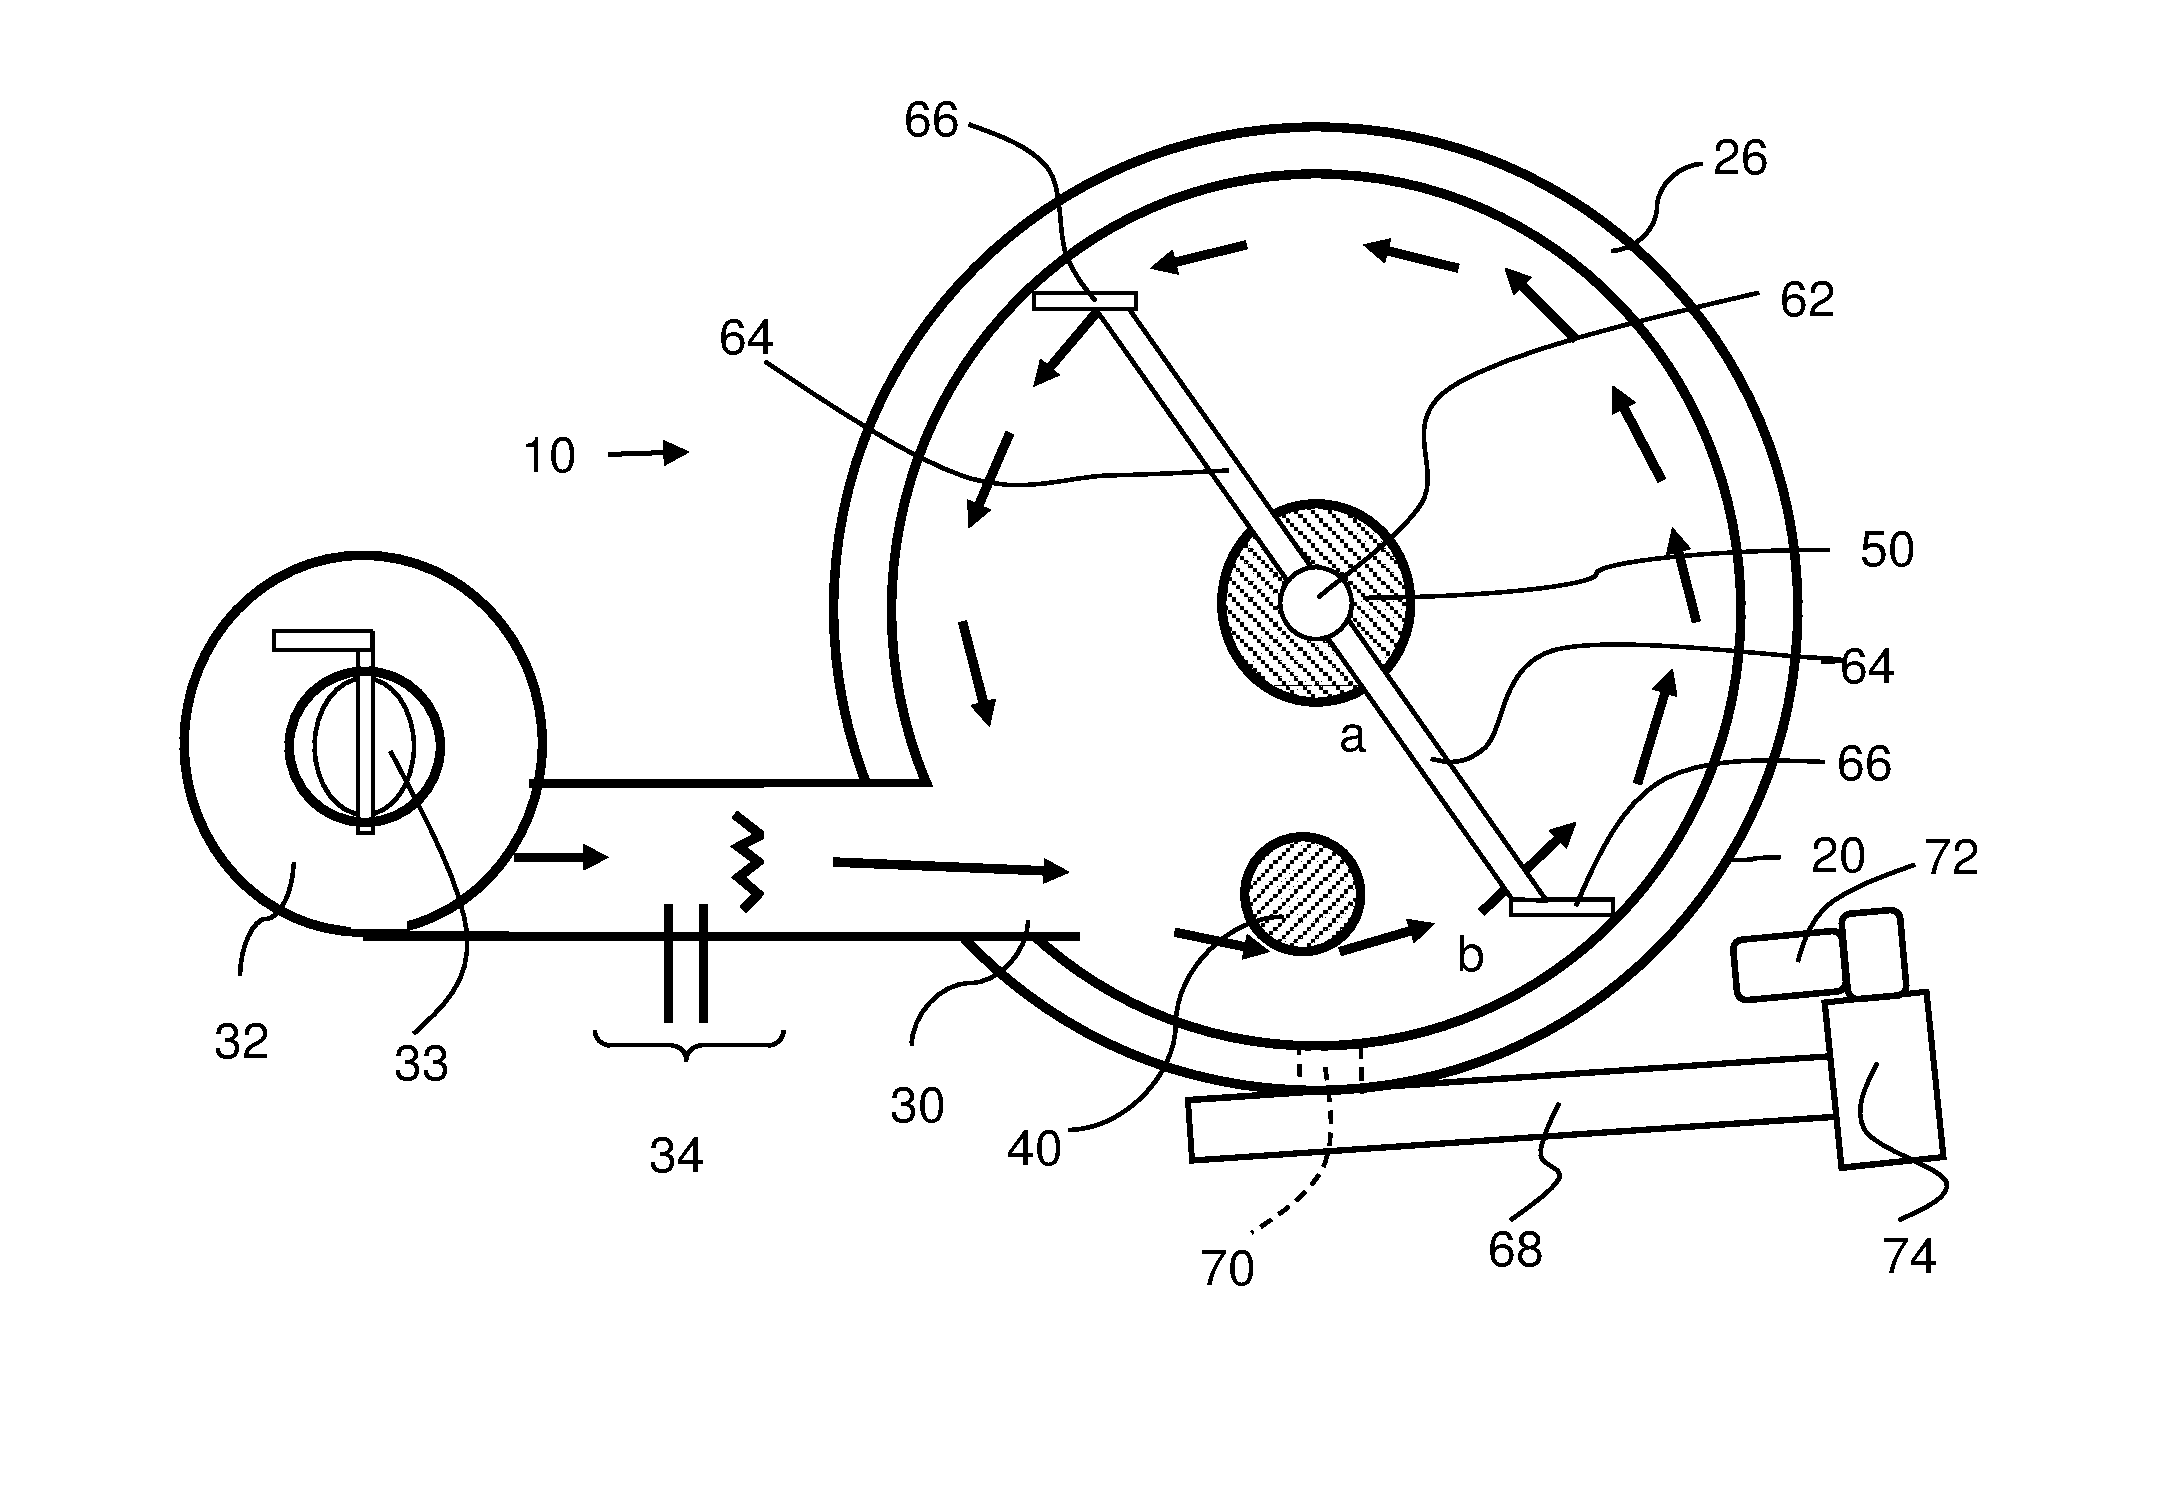 Combustion apparatus for combusting recyclable or waste material